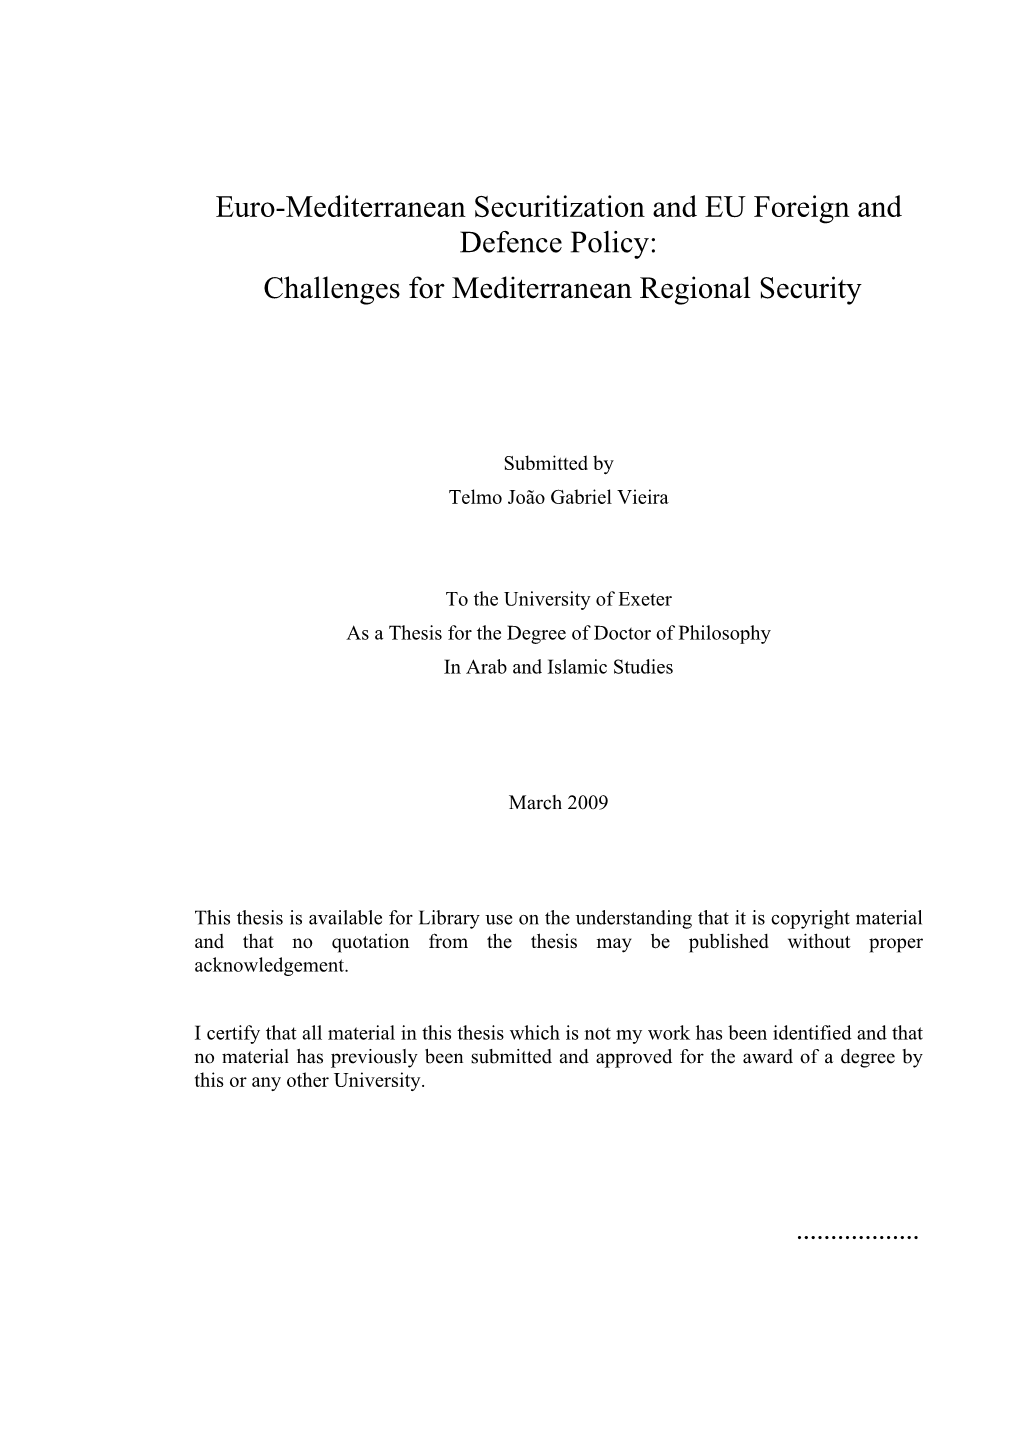 Euro-Mediterranean Securitization and EU Foreign and Defence Policy: Challenges for Mediterranean Regional Security